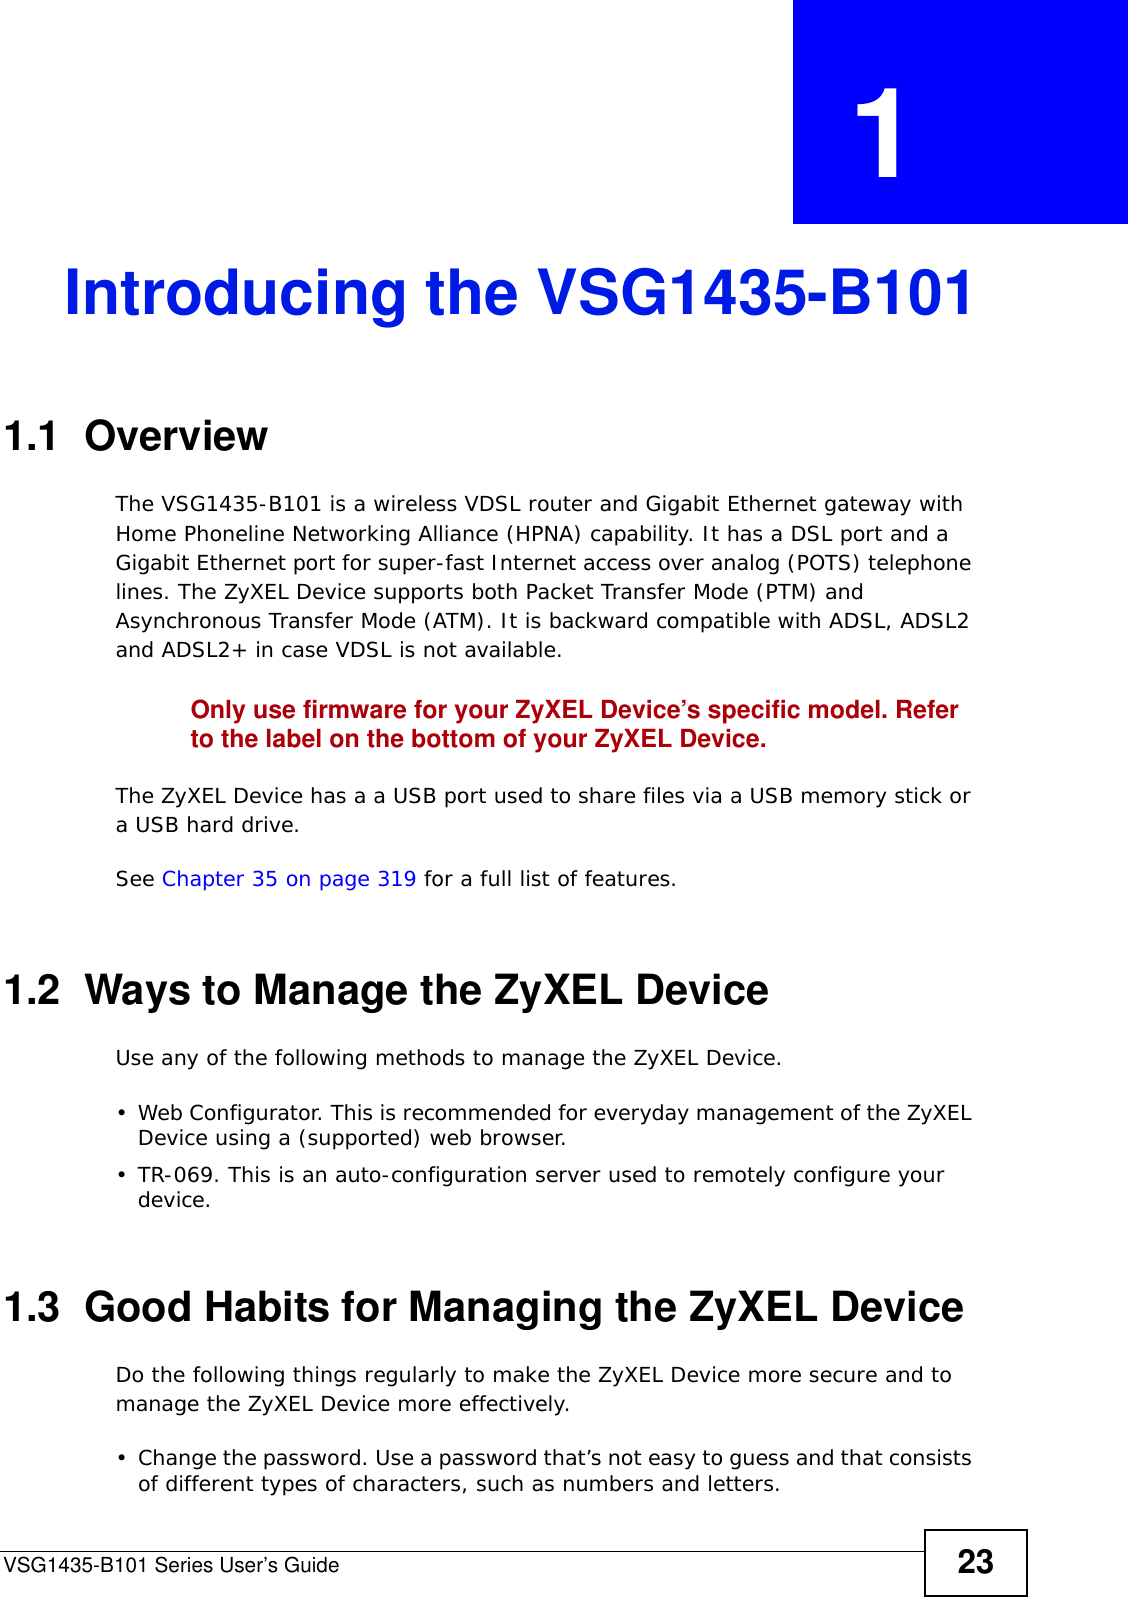 VSG1435-B101 Series User’s Guide 23CHAPTER  1 Introducing the VSG1435-B1011.1  OverviewThe VSG1435-B101 is a wireless VDSL router and Gigabit Ethernet gateway with Home Phoneline Networking Alliance (HPNA) capability. It has a DSL port and a Gigabit Ethernet port for super-fast Internet access over analog (POTS) telephone lines. The ZyXEL Device supports both Packet Transfer Mode (PTM) and Asynchronous Transfer Mode (ATM). It is backward compatible with ADSL, ADSL2 and ADSL2+ in case VDSL is not available.Only use firmware for your ZyXEL Device’s specific model. Refer to the label on the bottom of your ZyXEL Device.The ZyXEL Device has a a USB port used to share files via a USB memory stick or a USB hard drive. See Chapter 35 on page 319 for a full list of features.1.2  Ways to Manage the ZyXEL DeviceUse any of the following methods to manage the ZyXEL Device.• Web Configurator. This is recommended for everyday management of the ZyXEL Device using a (supported) web browser.• TR-069. This is an auto-configuration server used to remotely configure your device.1.3  Good Habits for Managing the ZyXEL DeviceDo the following things regularly to make the ZyXEL Device more secure and to manage the ZyXEL Device more effectively.• Change the password. Use a password that’s not easy to guess and that consists of different types of characters, such as numbers and letters.